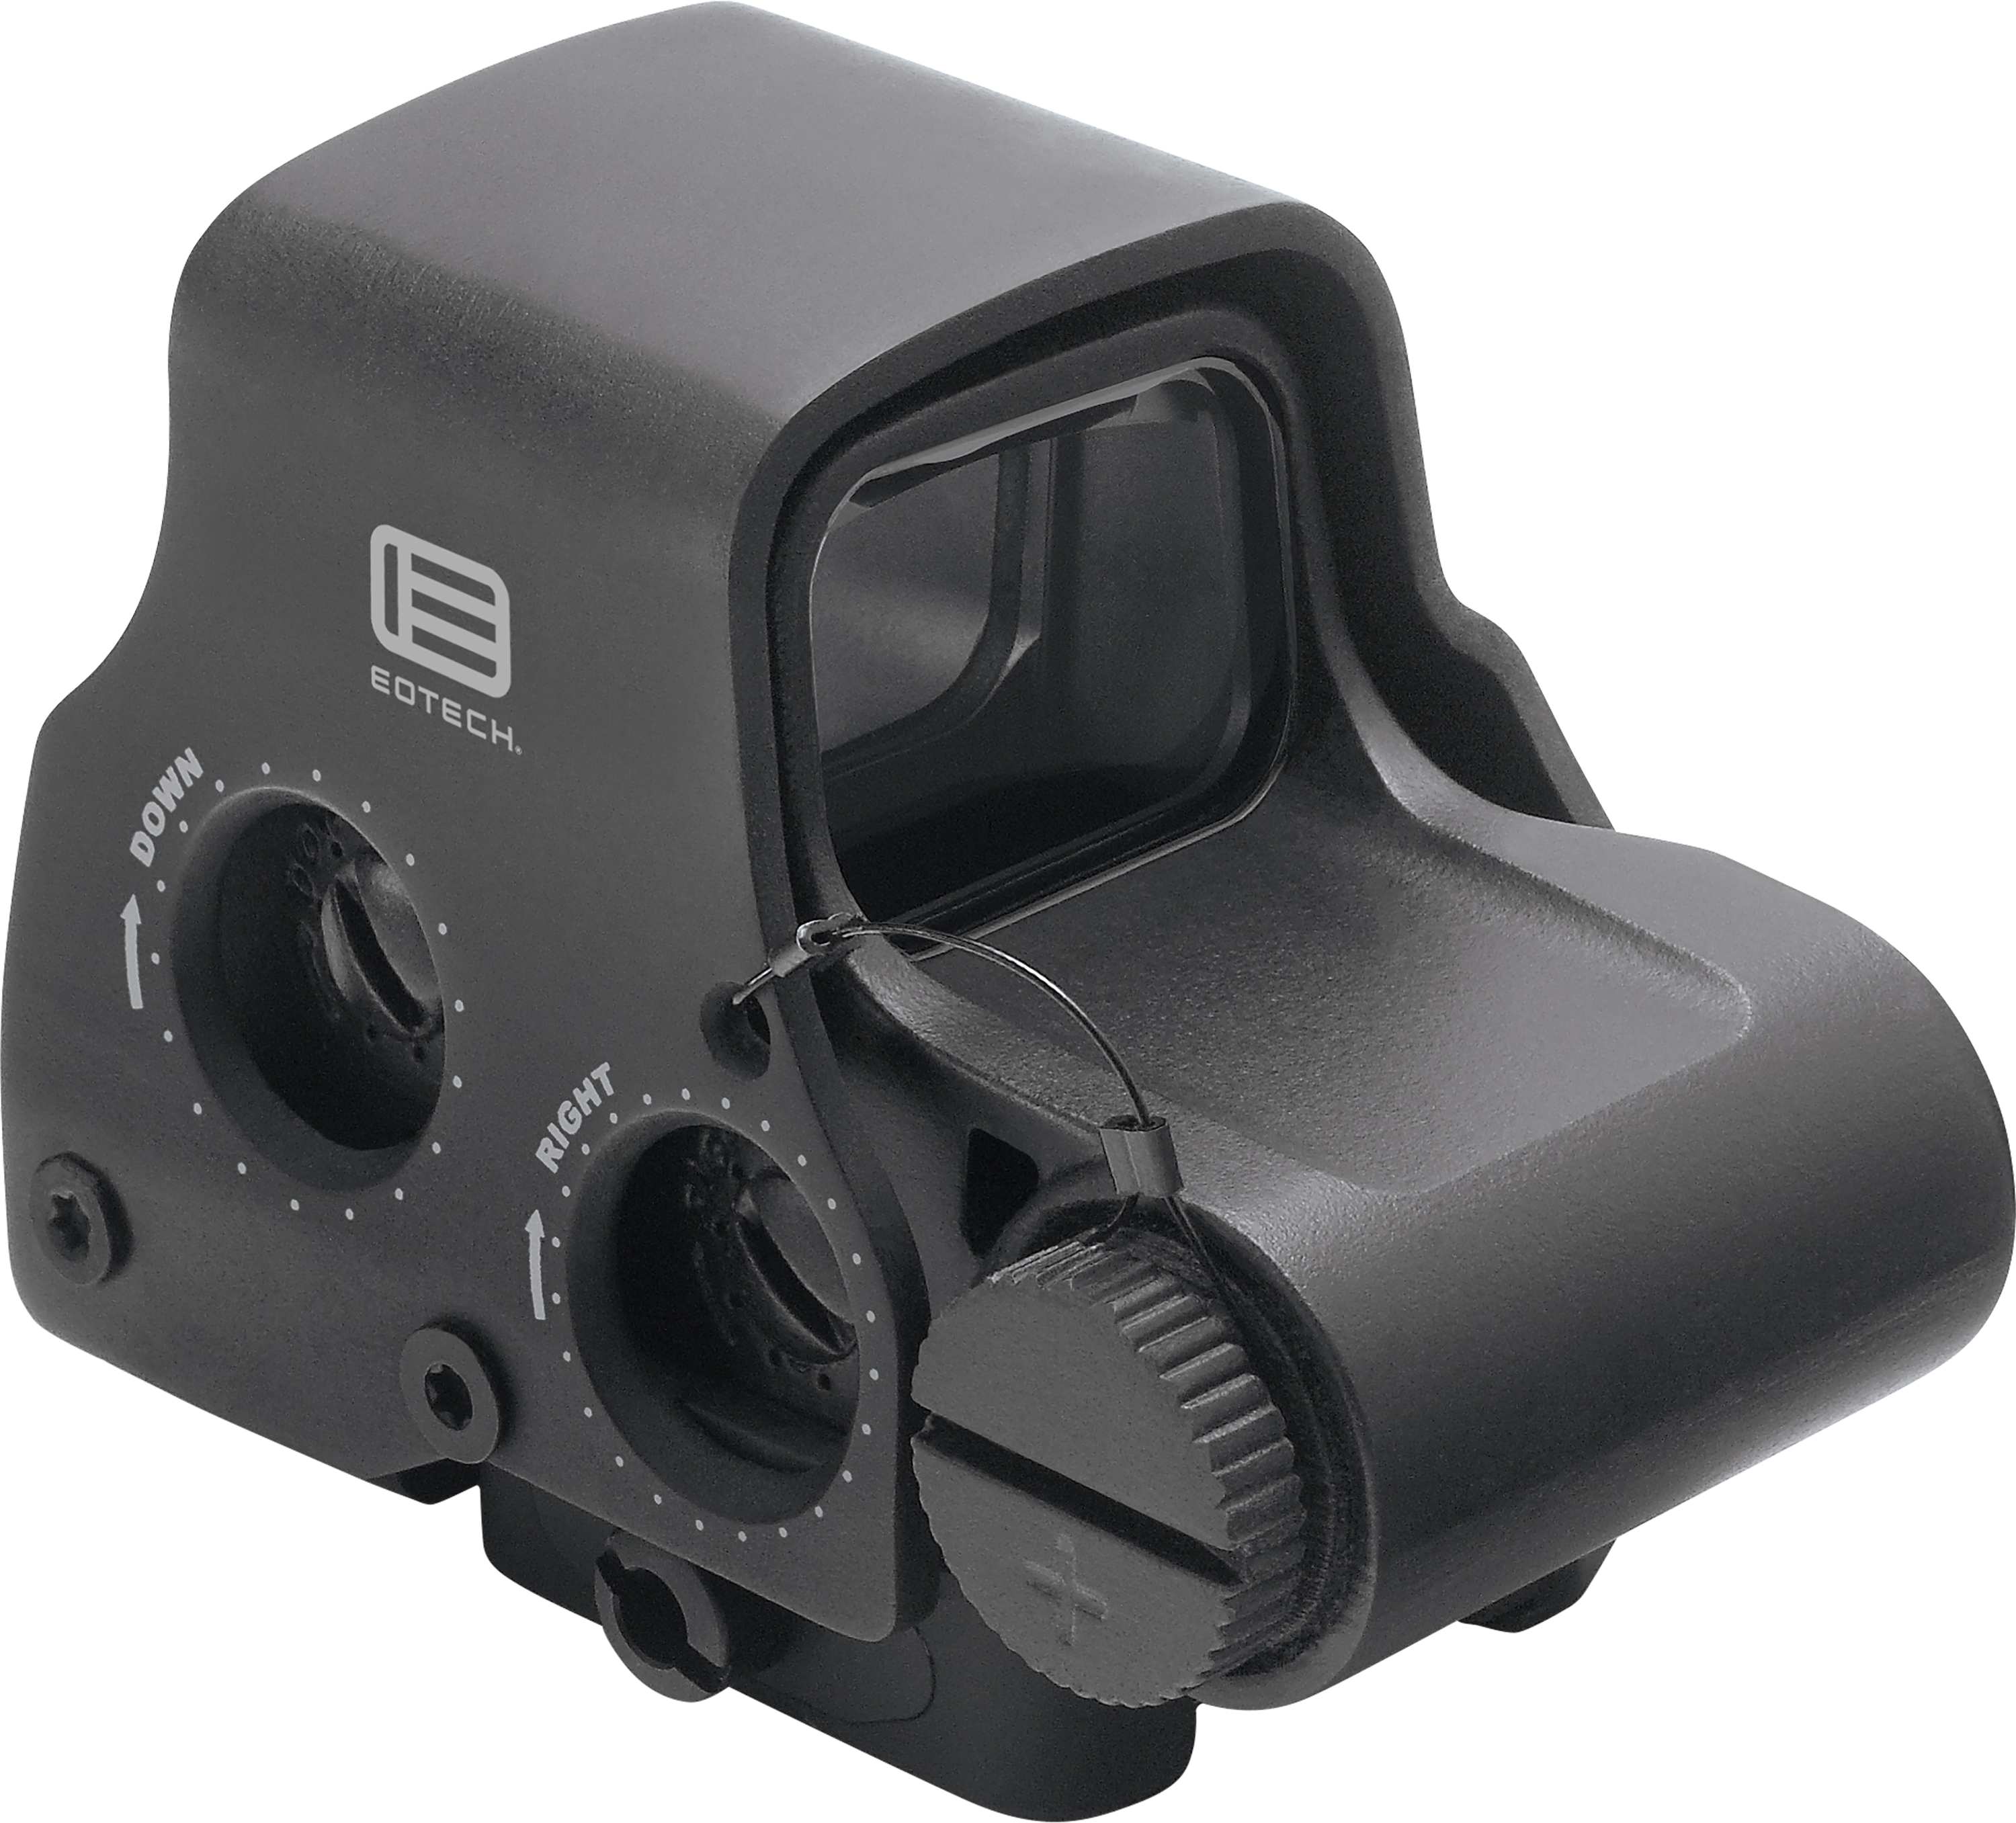 EOTECH EXPS2-0 Holographic Weapon Sight